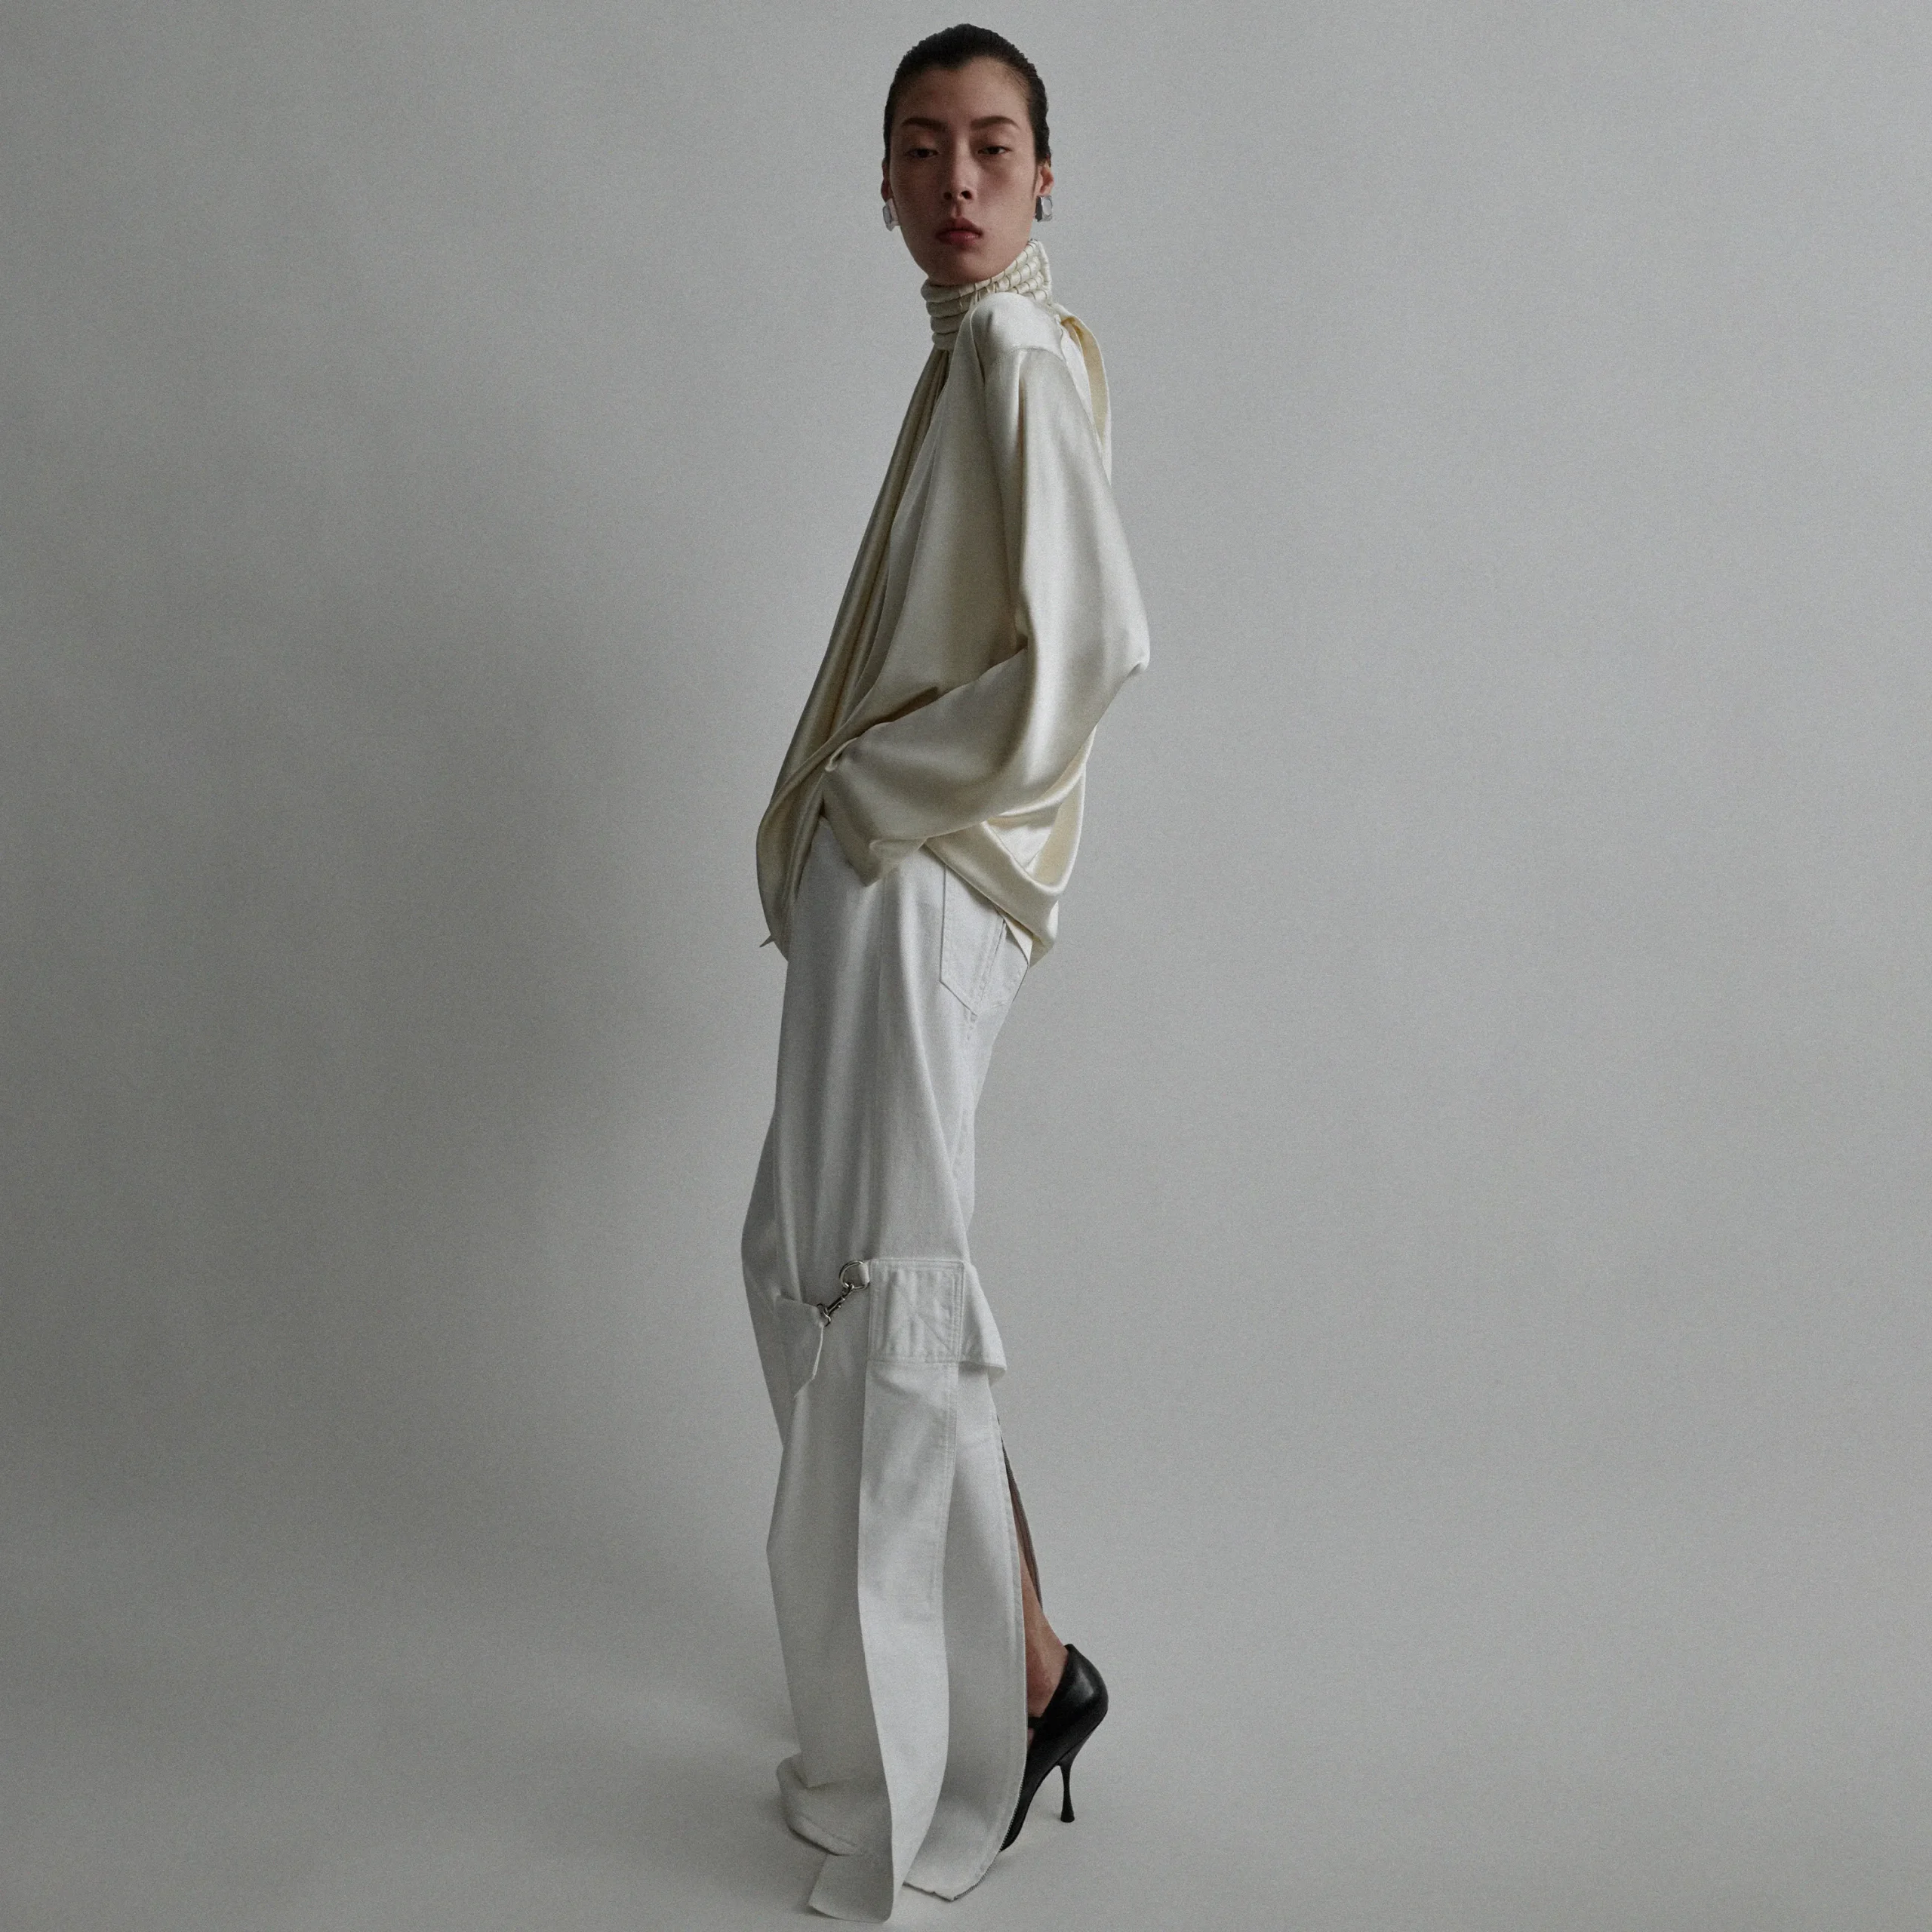 Phoebe Philo is back: A first look at her 'A1' collection